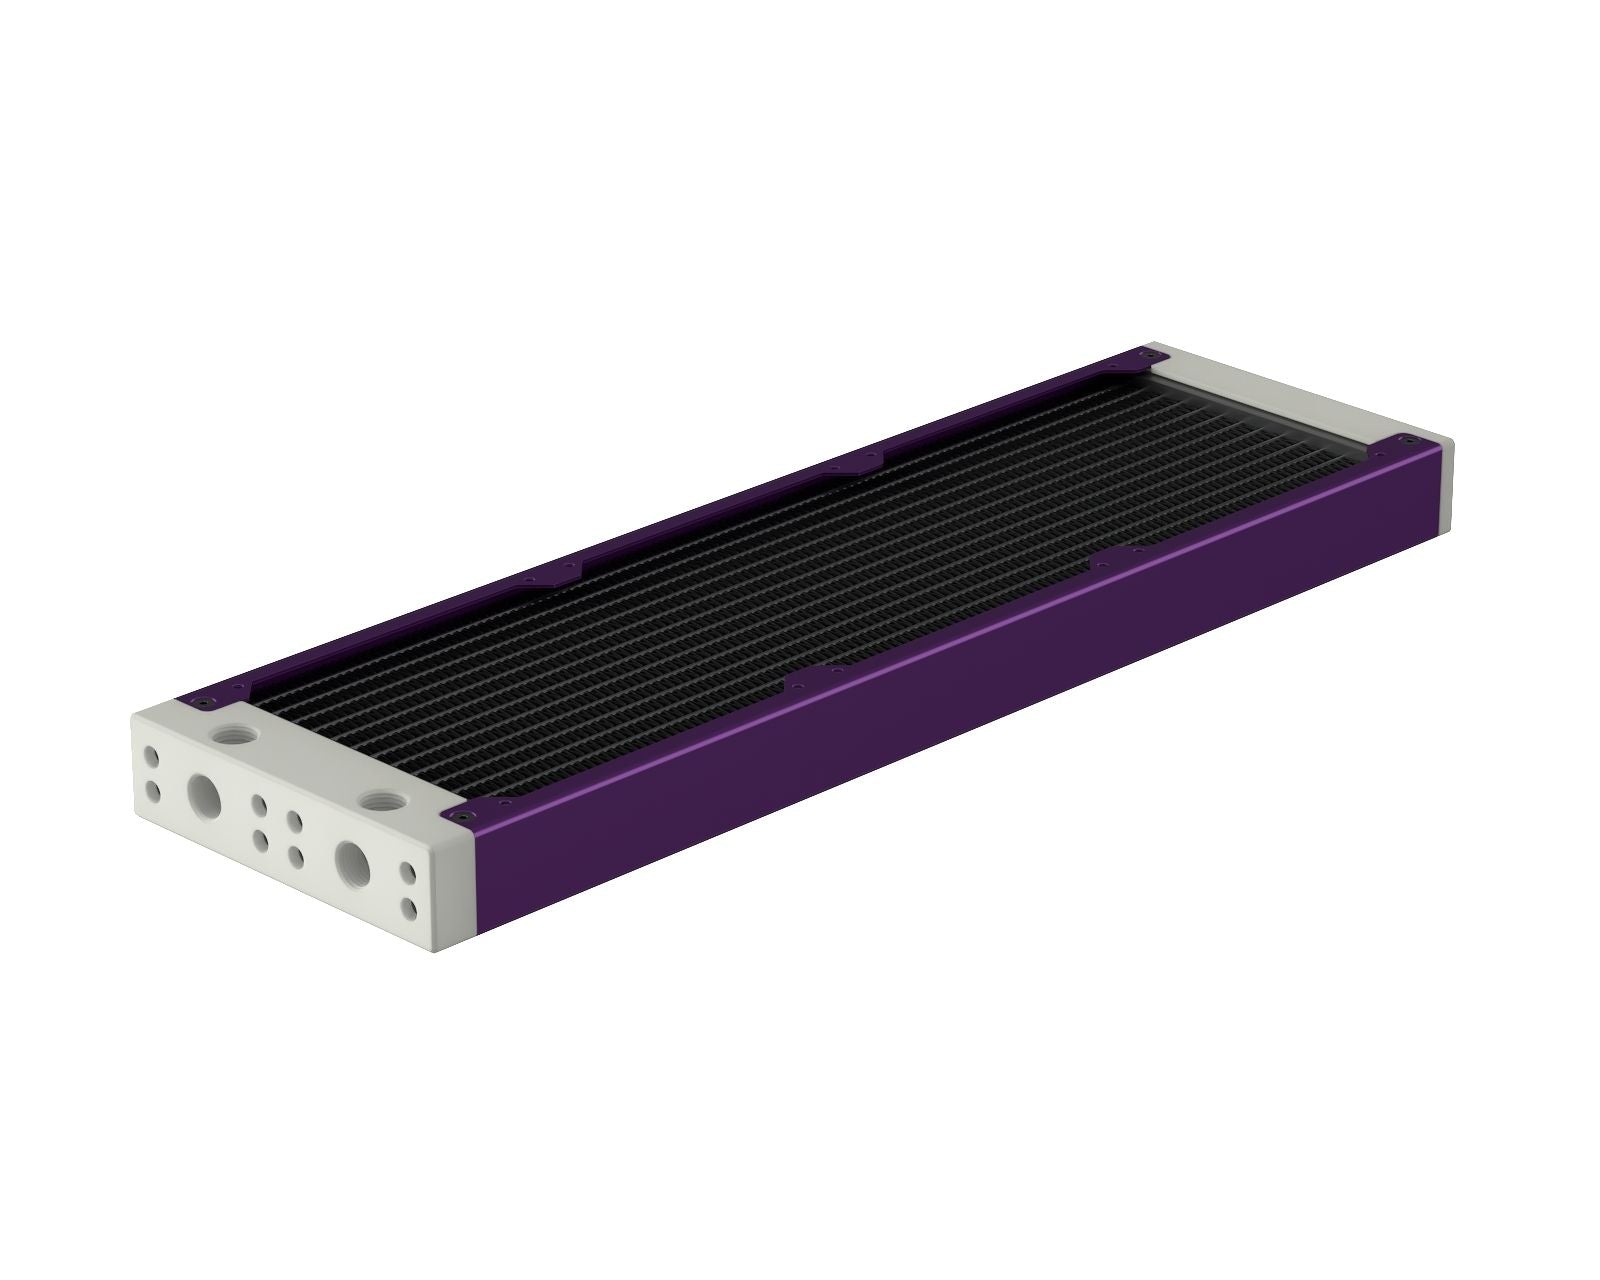 PrimoChill 360SL (30mm) EXIMO Modular Radiator, White POM, 3x120mm, Triple Fan (R-SL-W36) Available in 20+ Colors, Assembled in USA and Custom Watercooling Loop Ready - Candy Purple